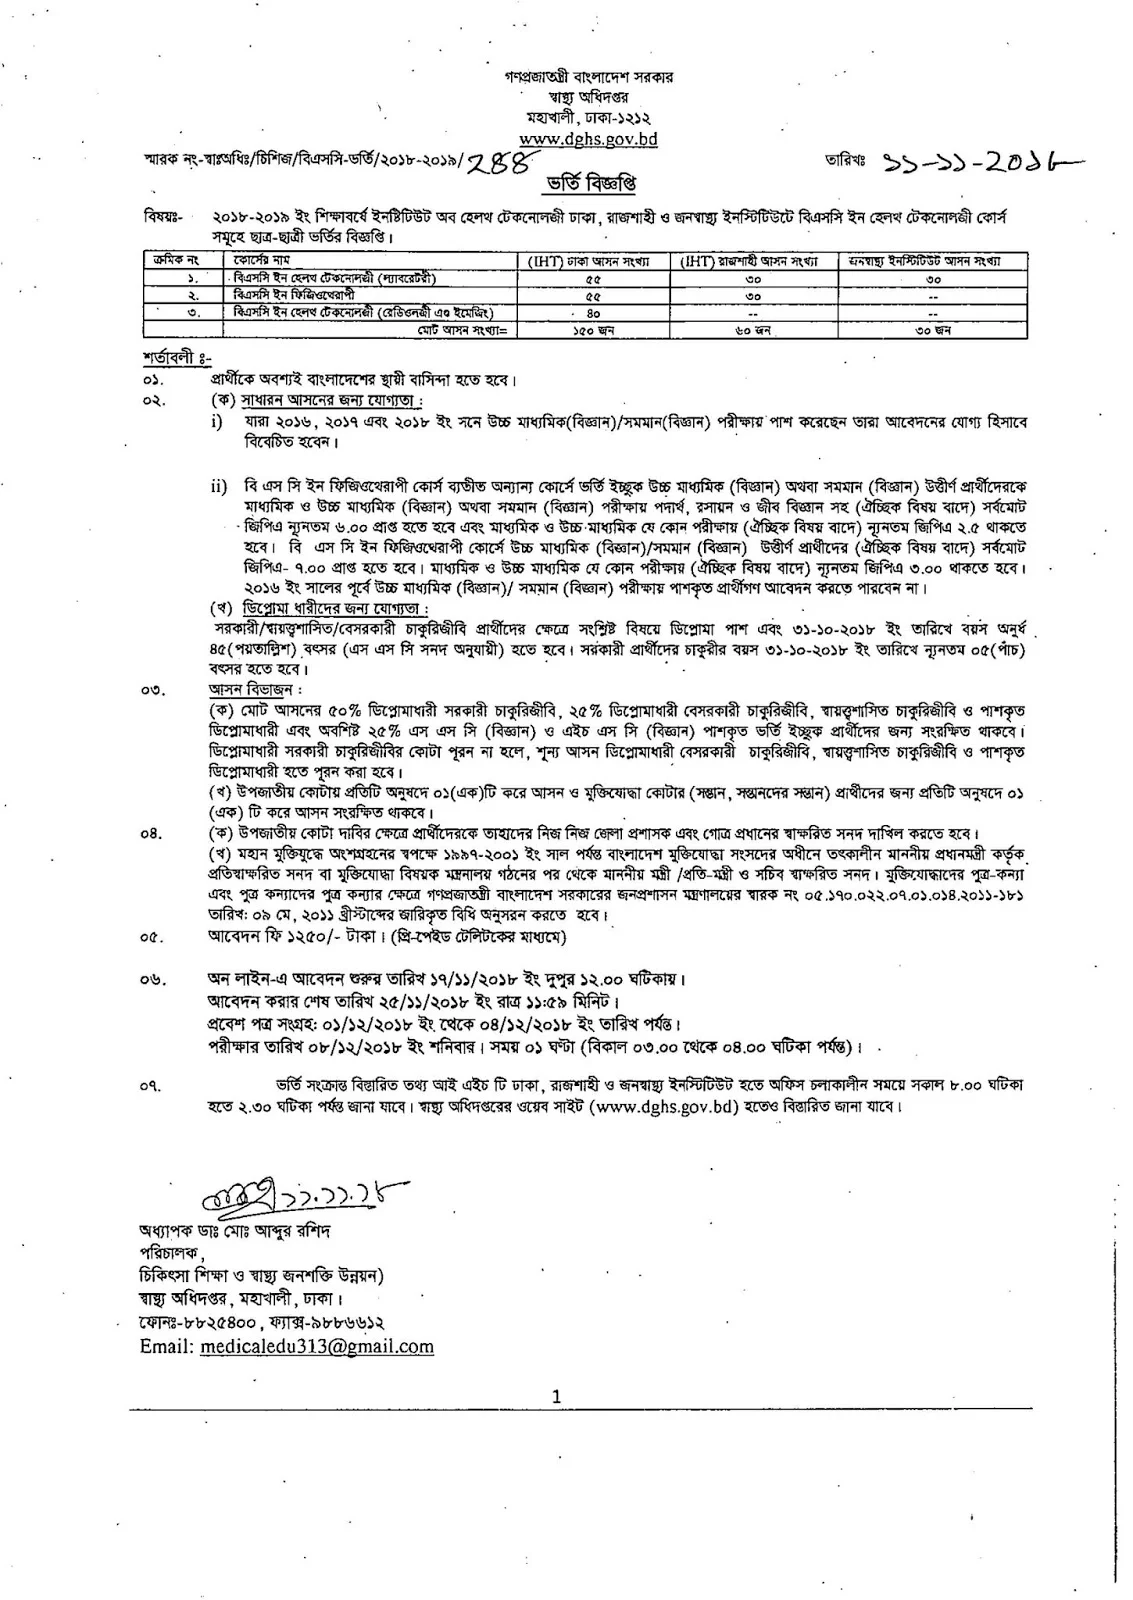 Institute of Health Technology Admission Test Circular 2018-2019